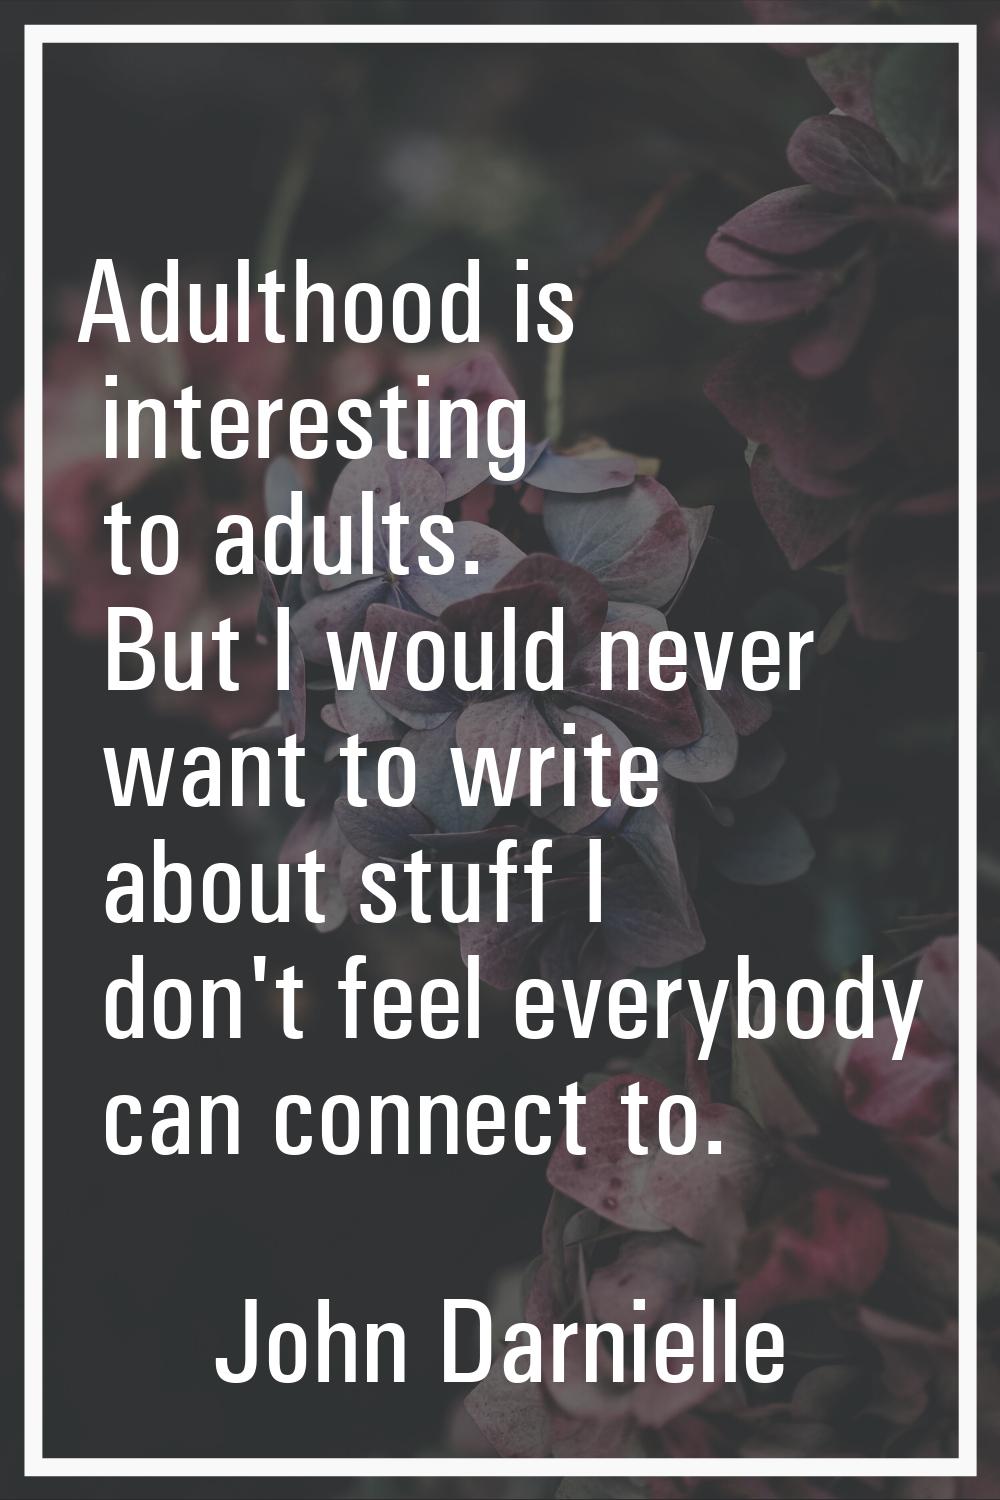 Adulthood is interesting to adults. But I would never want to write about stuff I don't feel everyb